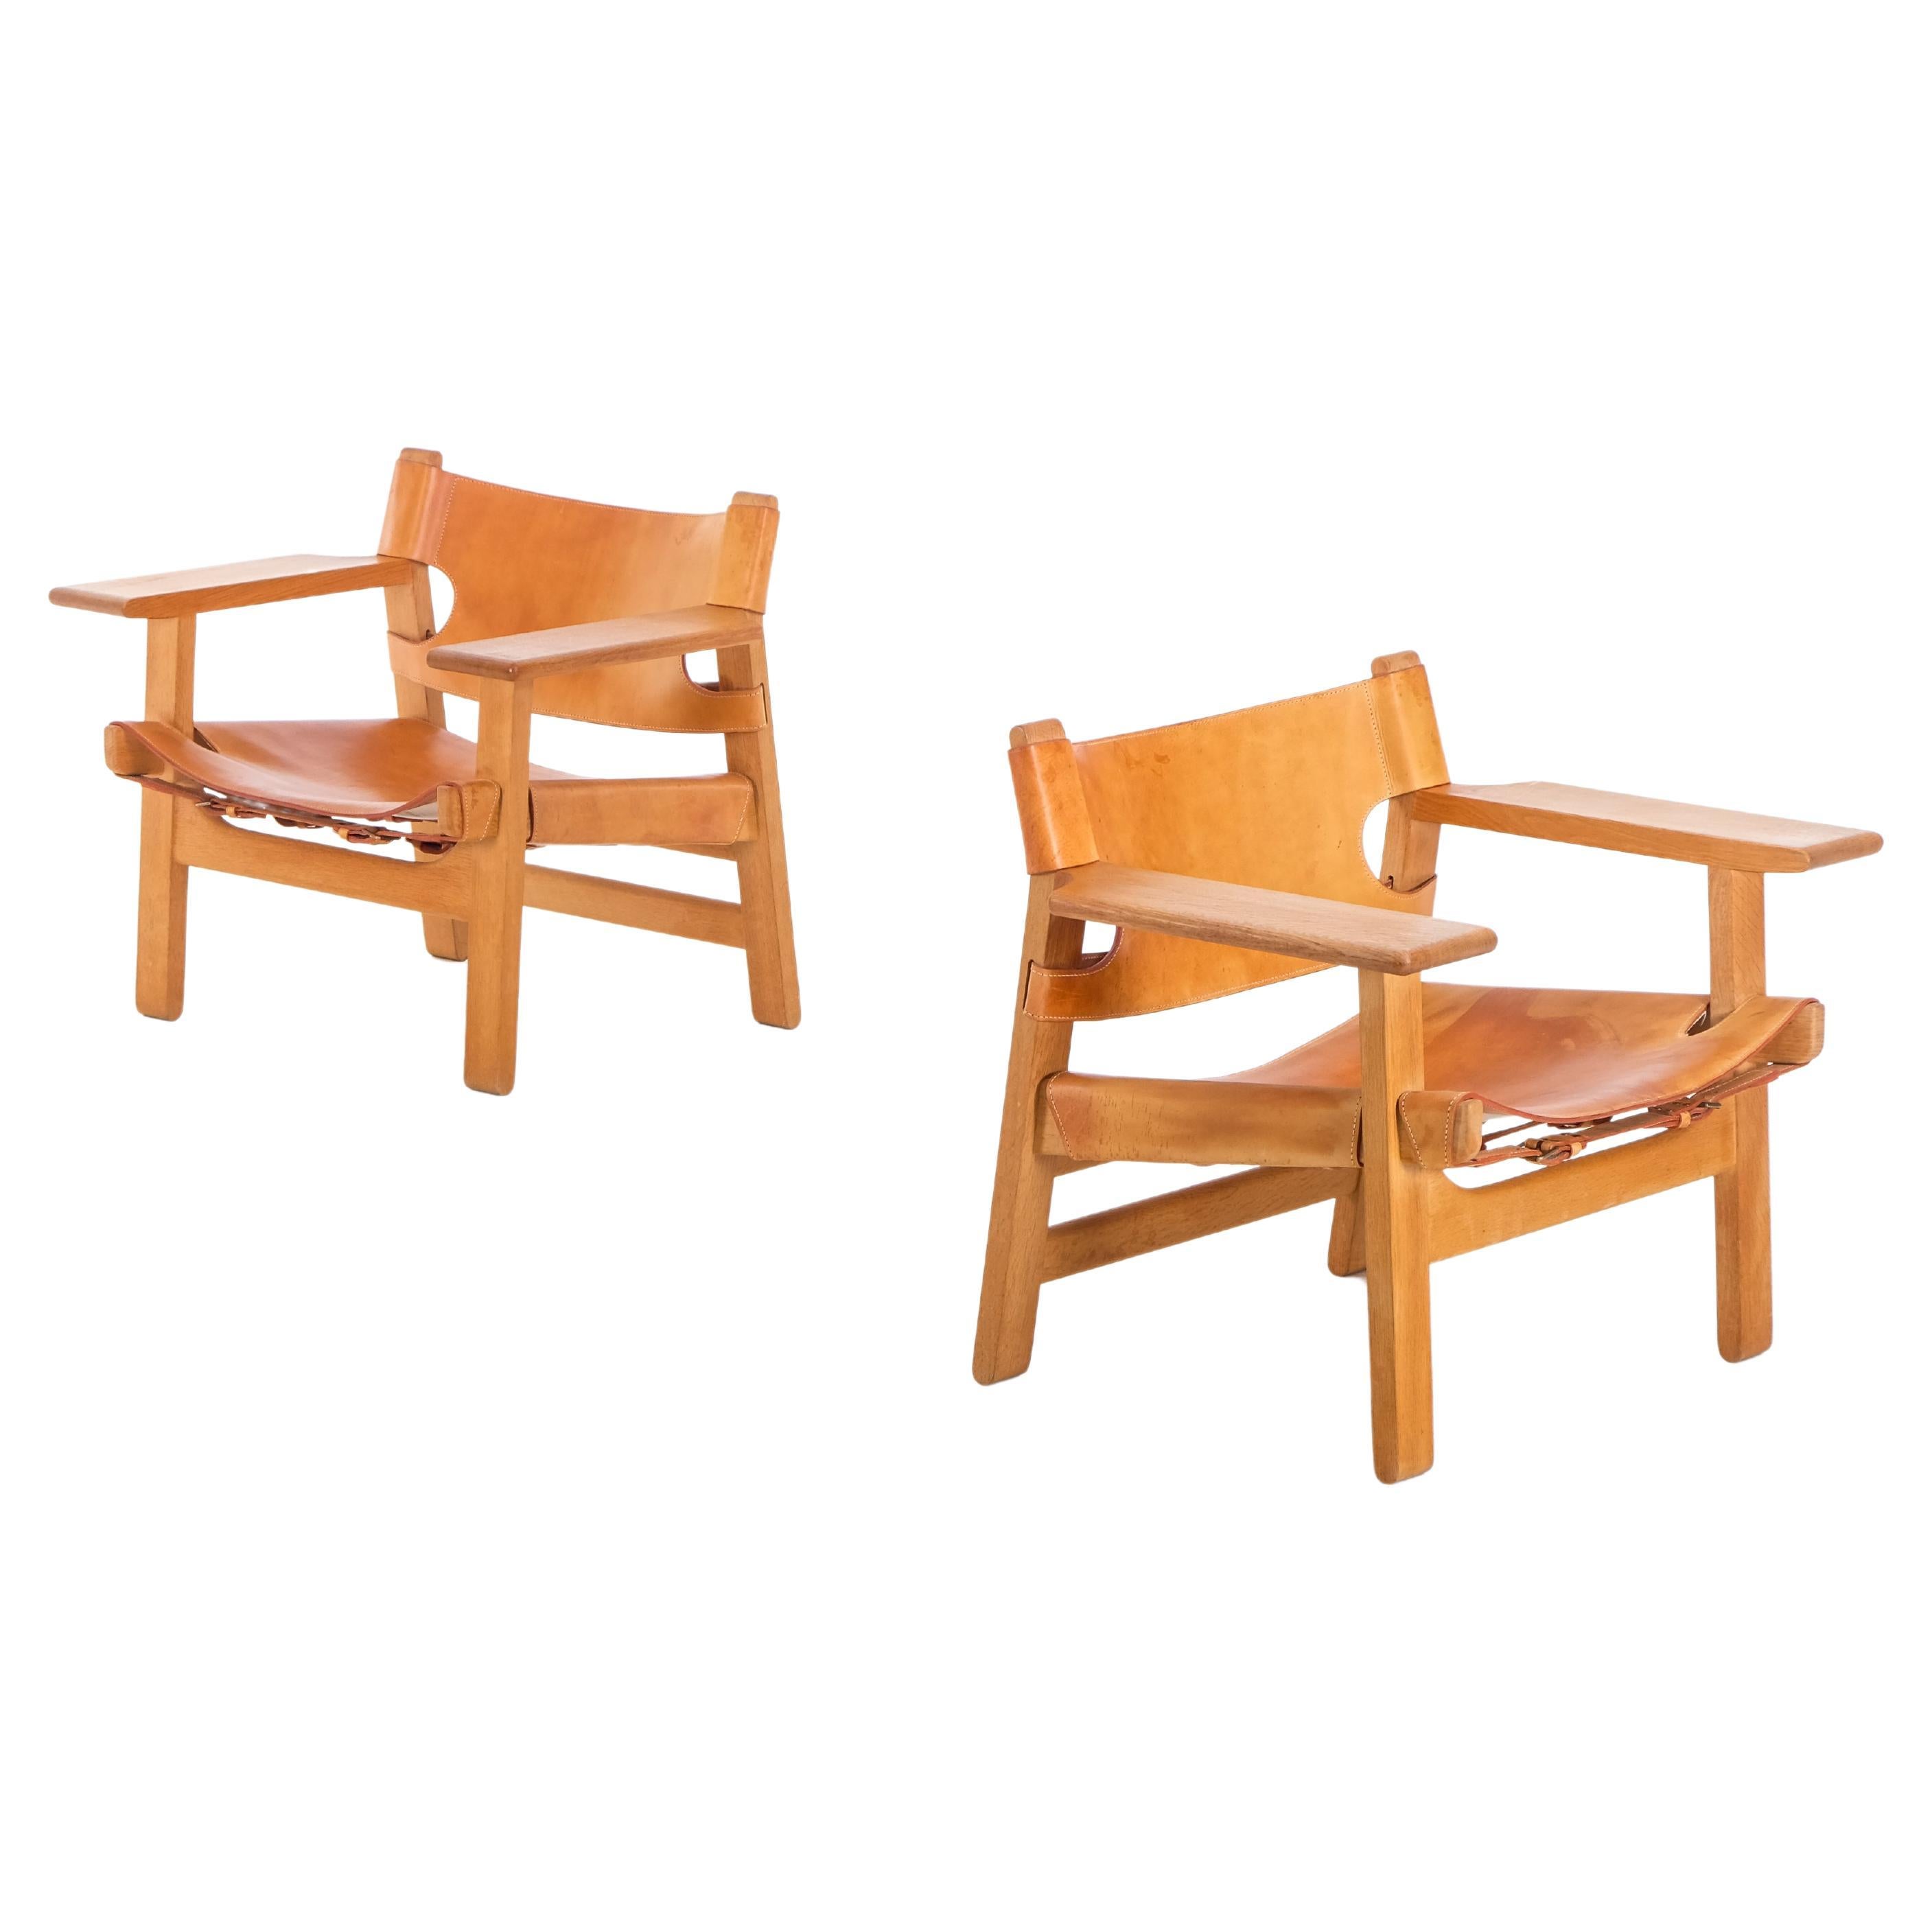 Pair of Spanish Chairs by Børge Mogensen, 1960s